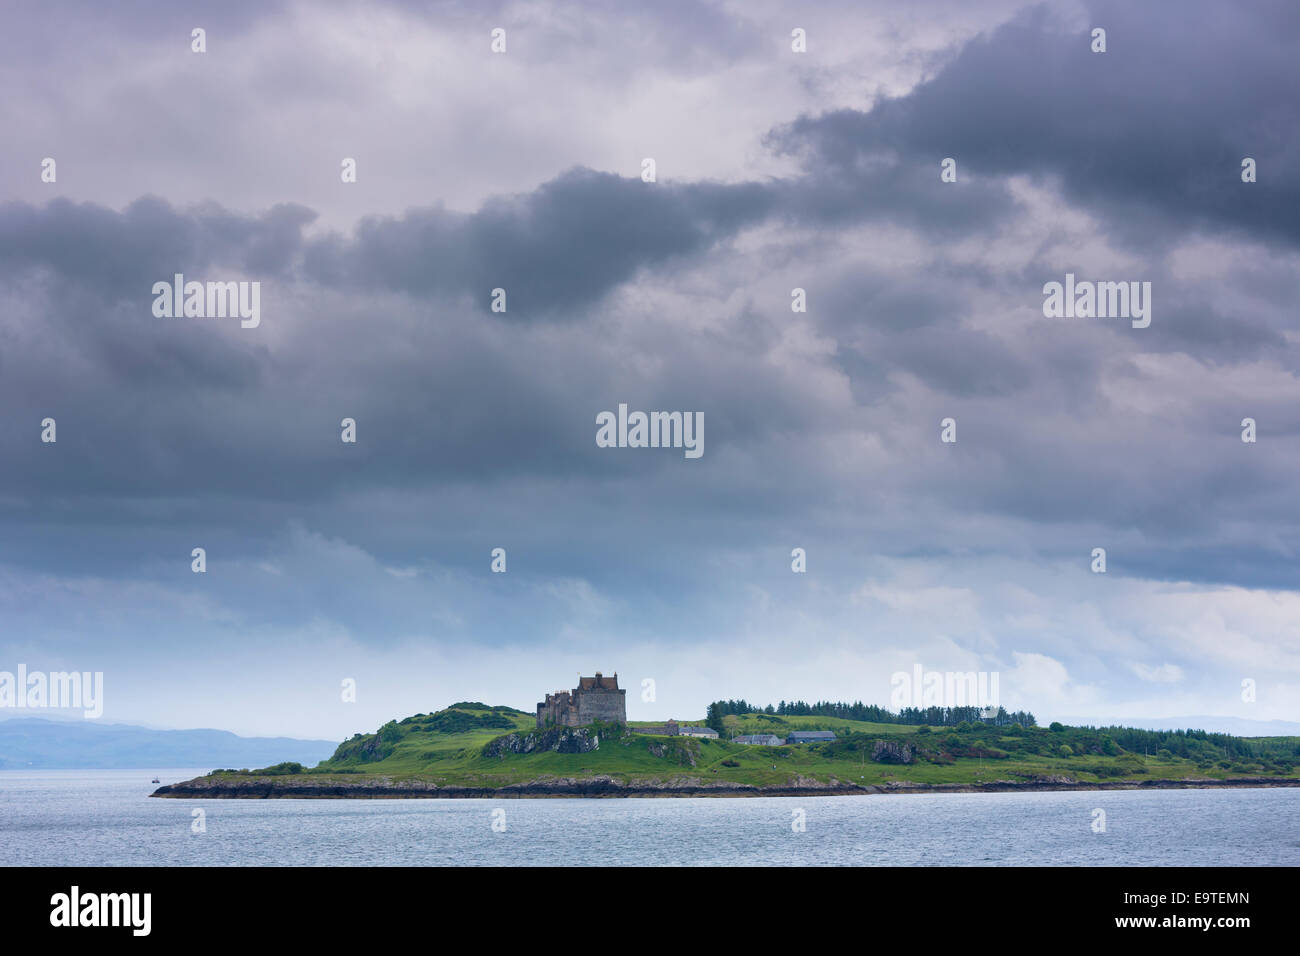 Sound of Mull and Duart Castle (home of Maclean clan) on Isle of Mull in the Inner Hebrides and Western Isles, West Coast of Sco Stock Photo